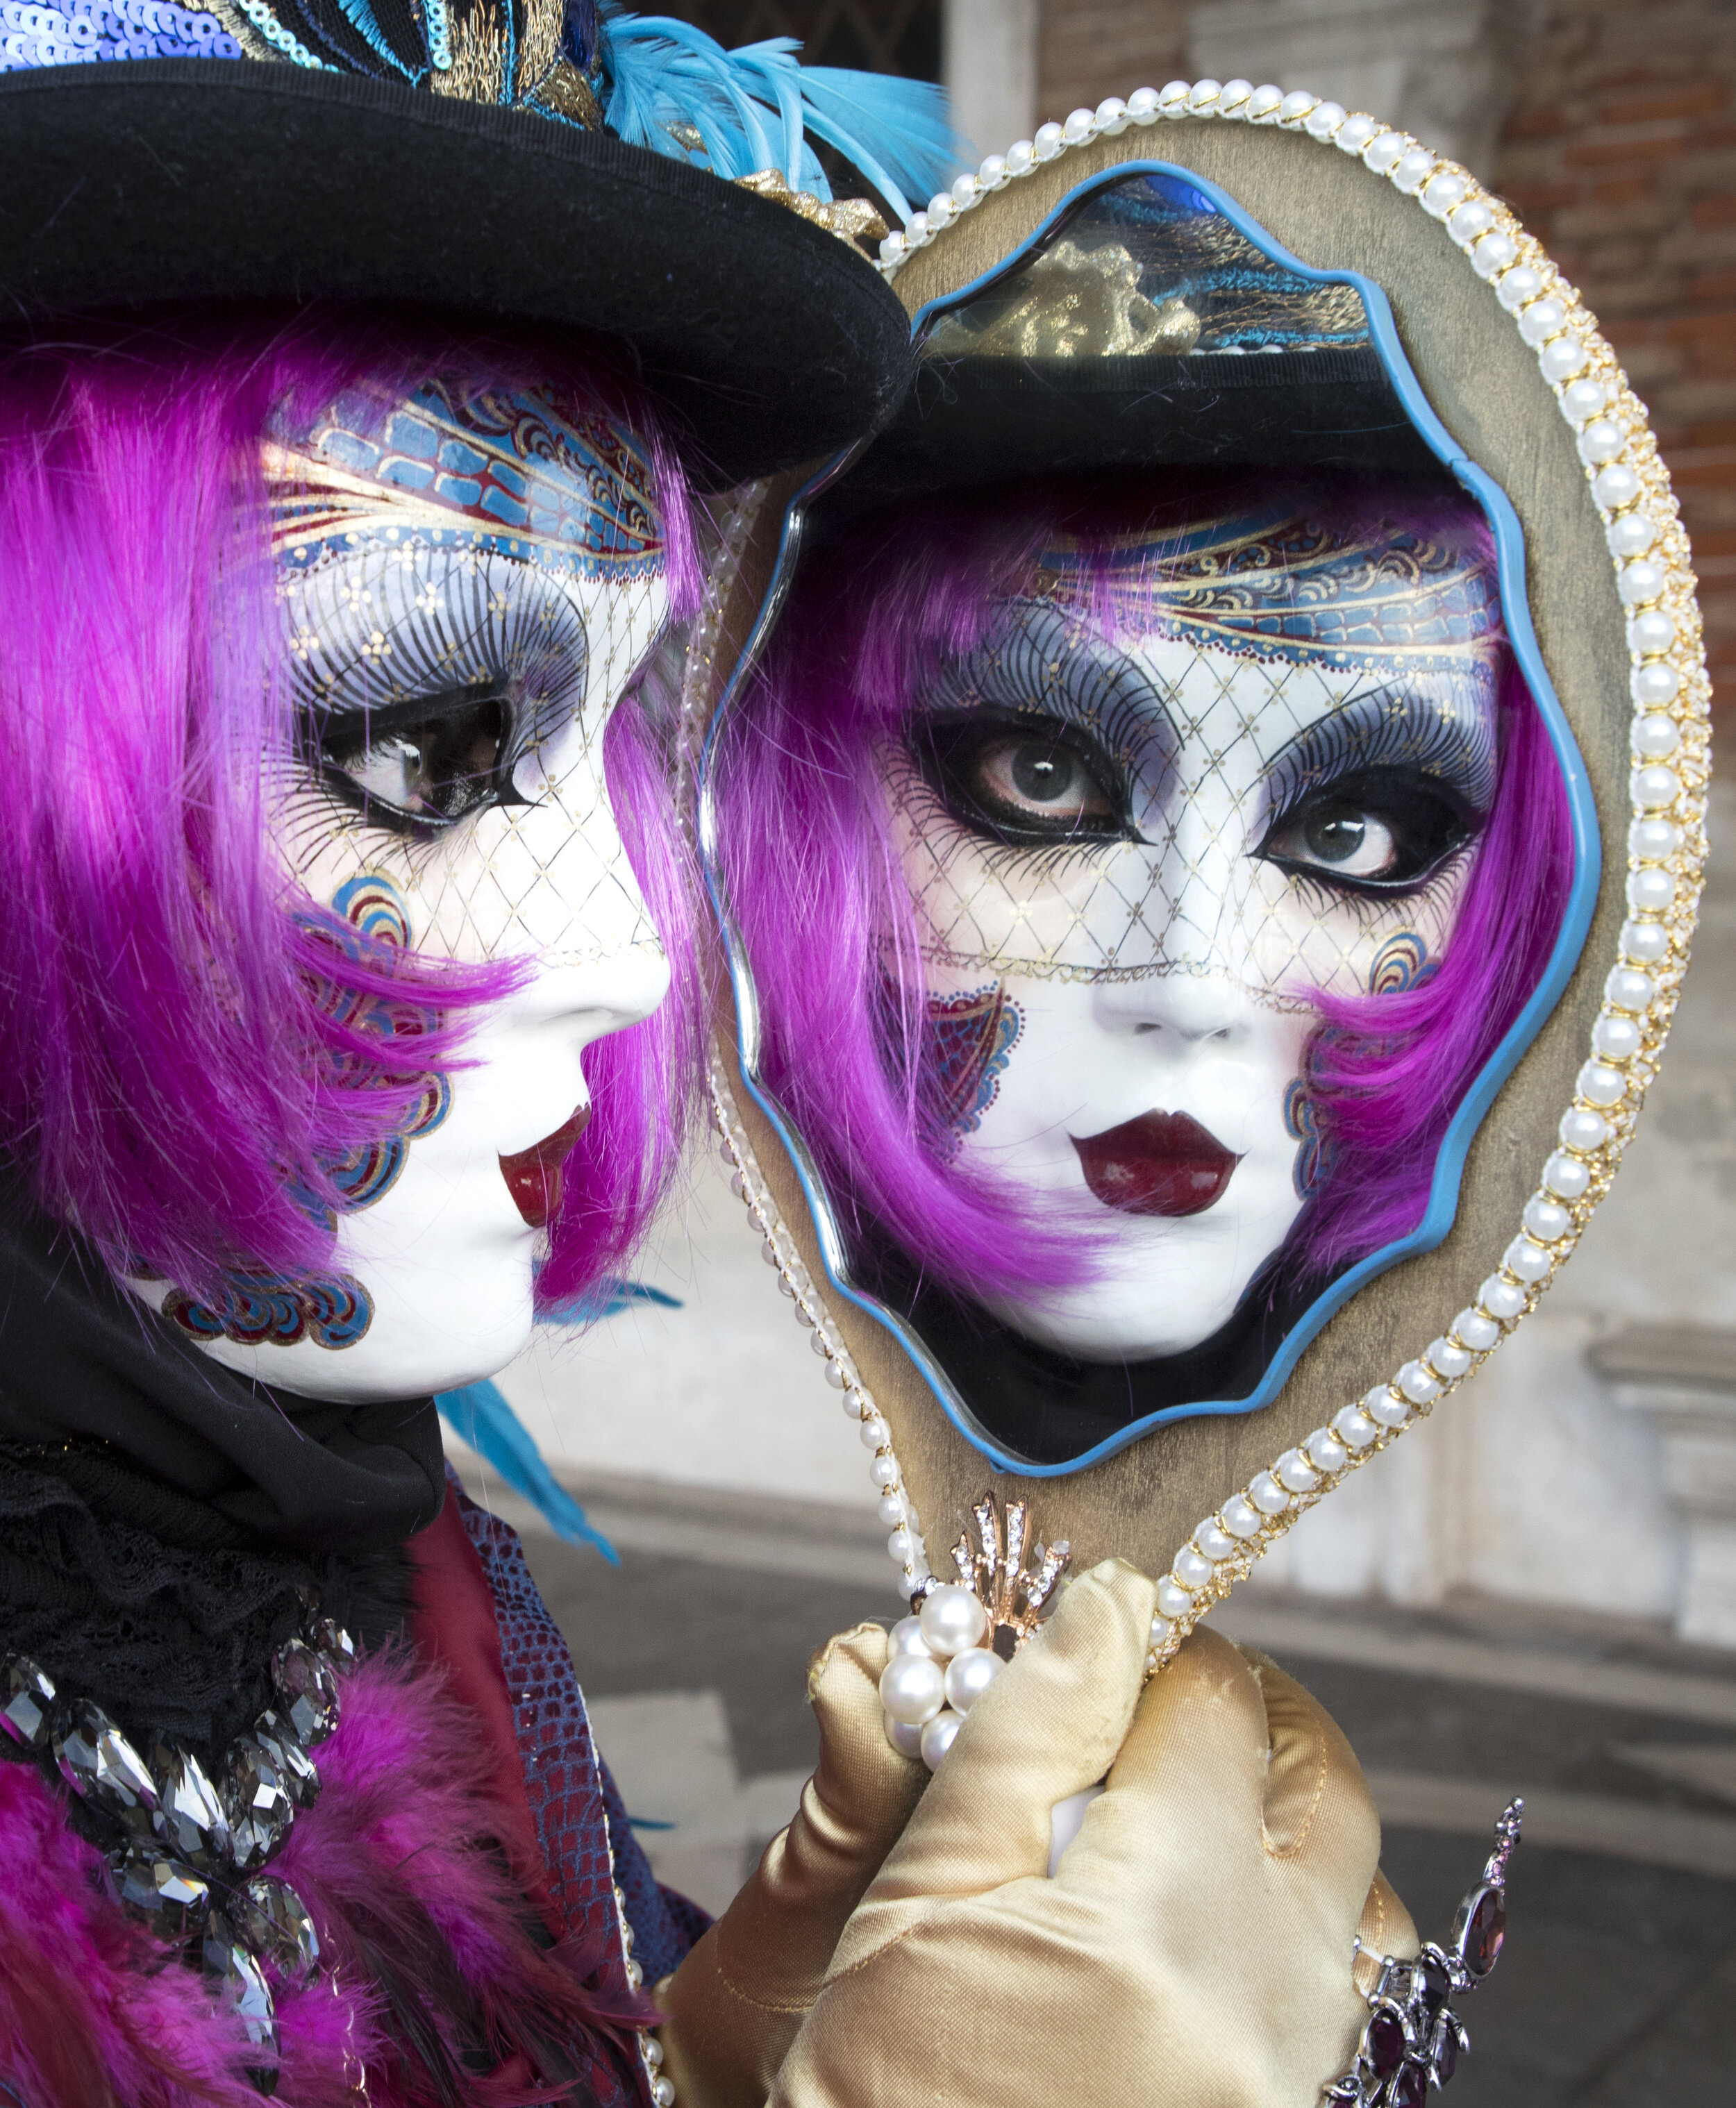 21. Colors of Carnevale – Venice, Italy